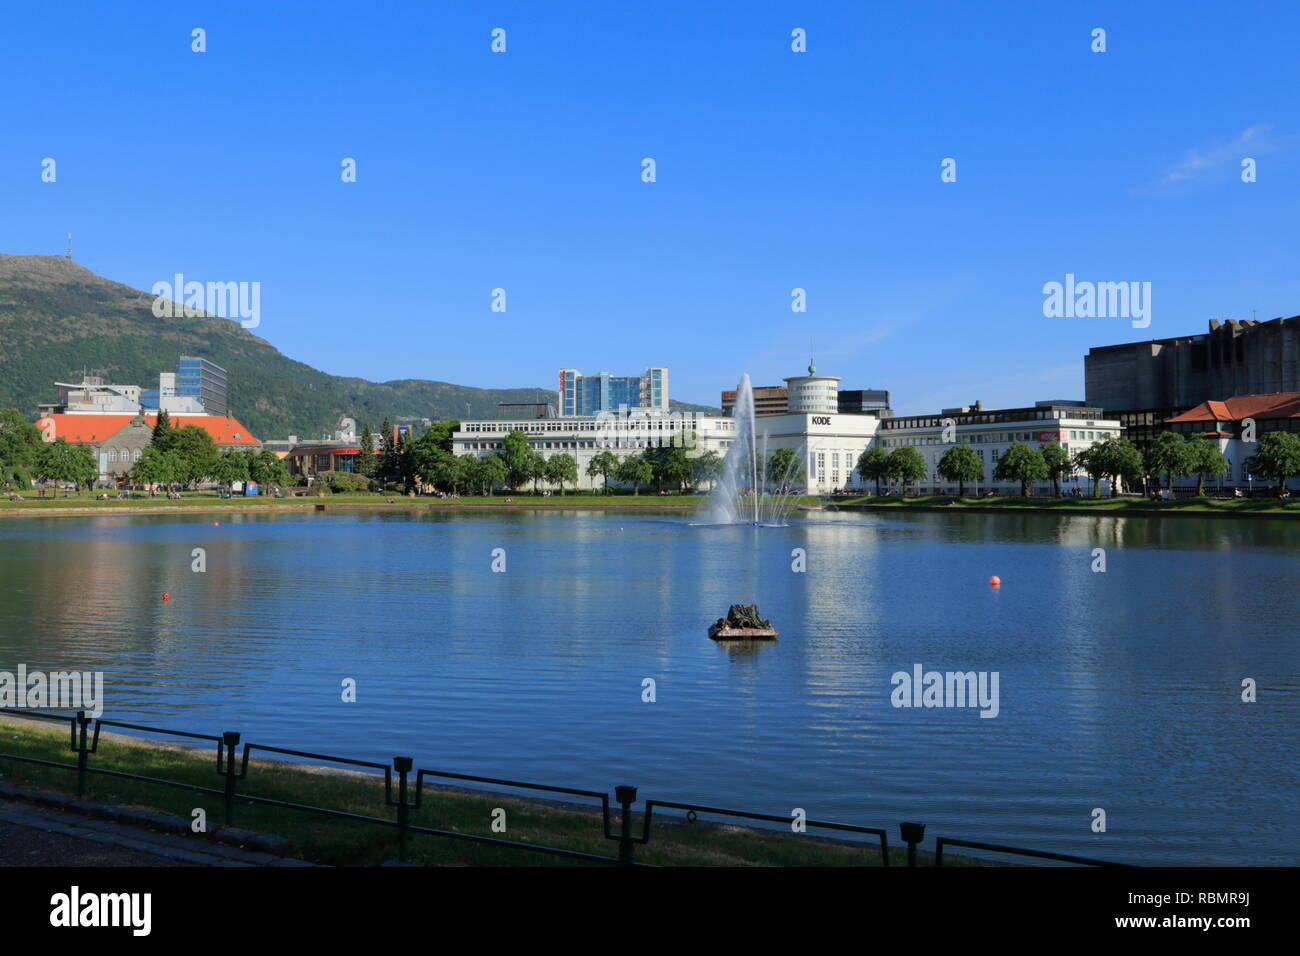 View across the lake, Lille Lungegårdsvannet, in Bergen city, Norway, towards the KODE 4 museum and other buildings during the summertime. Stock Photo